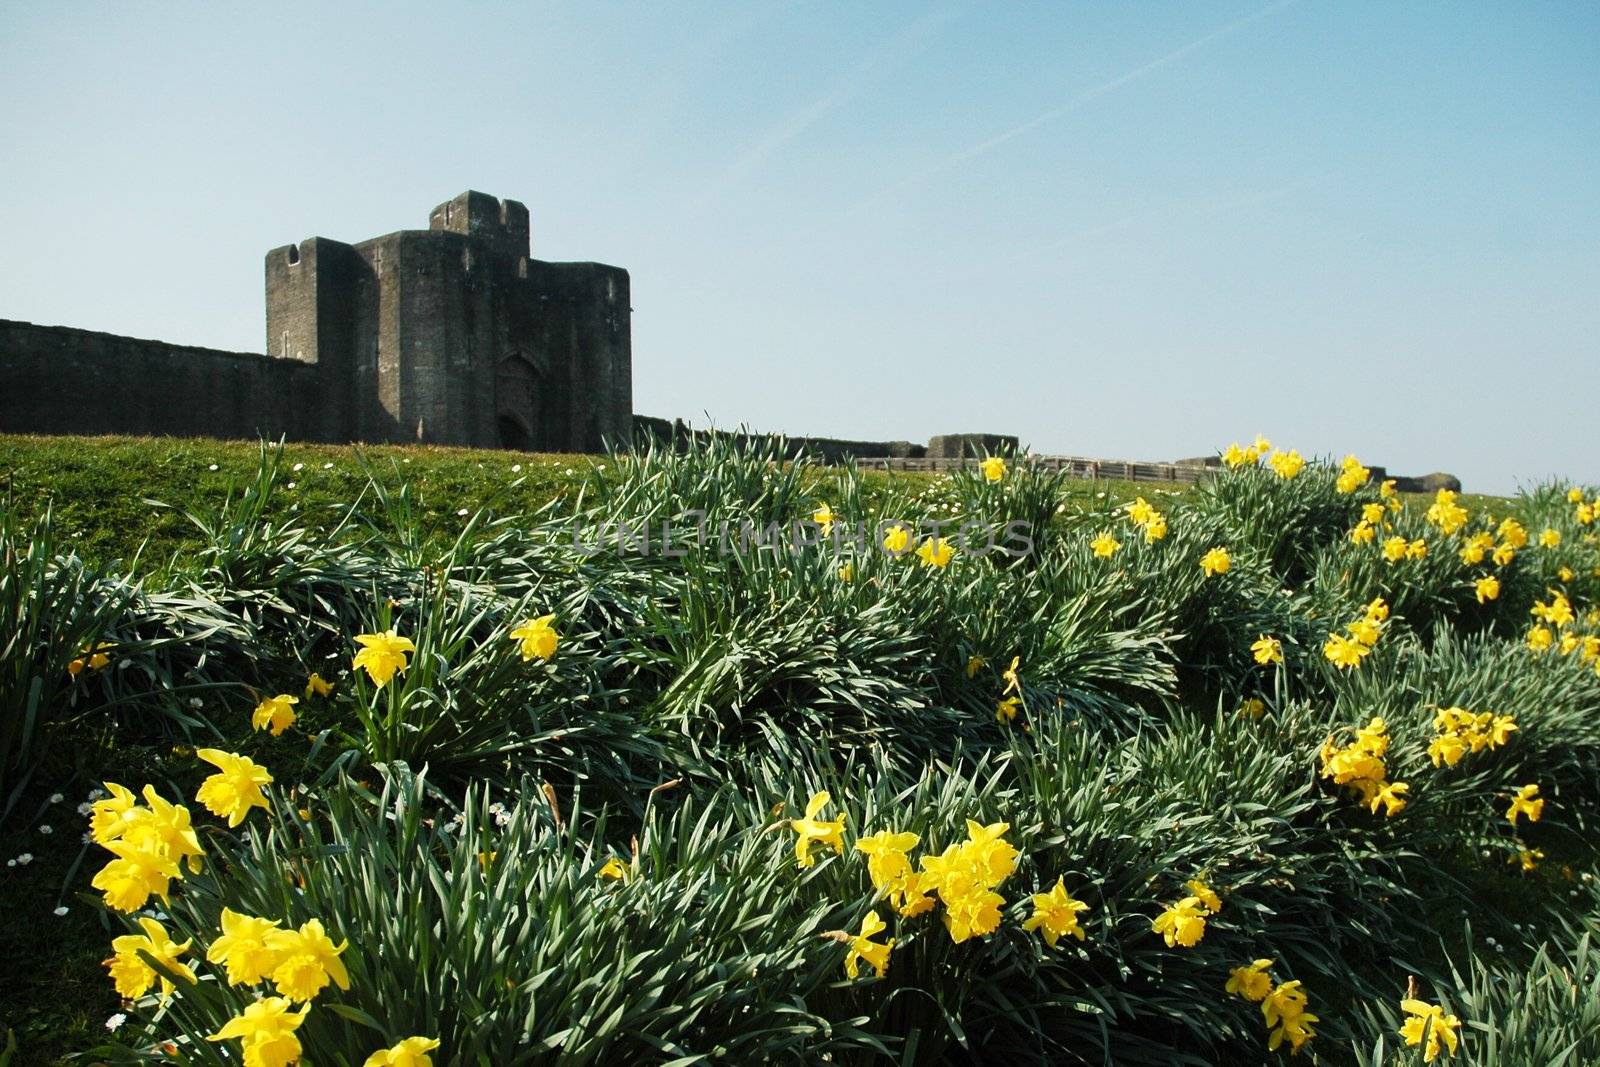 caerphilly castle with field and yellow flower, horizontally framed shot